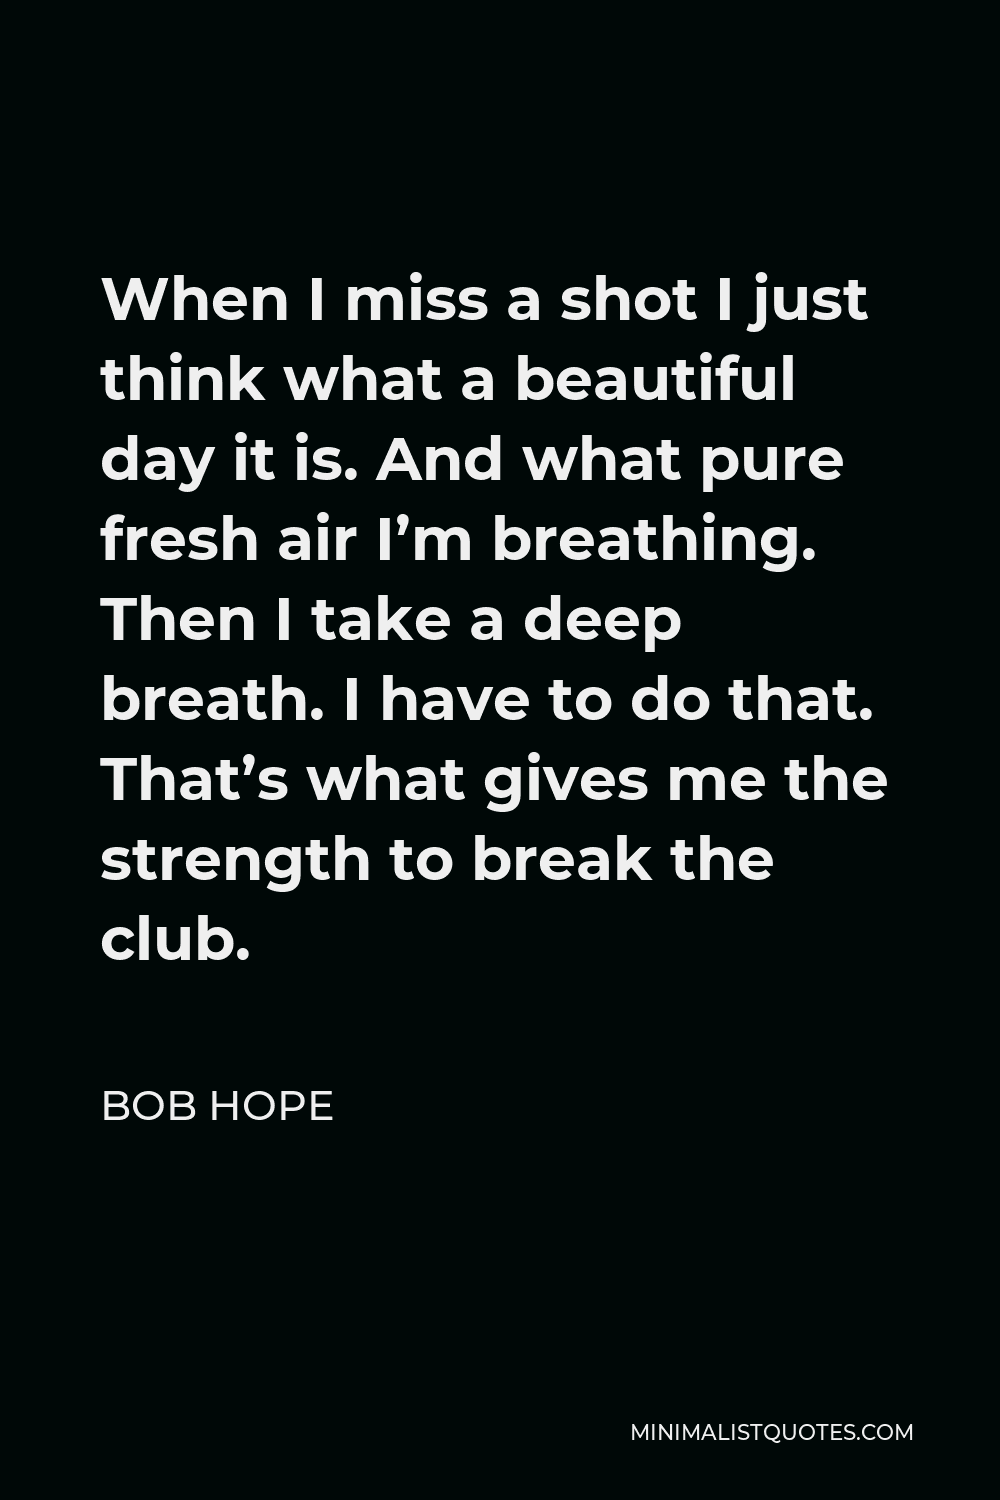 Bob Hope Quote - When I miss a shot I just think what a beautiful day it is. And what pure fresh air I’m breathing. Then I take a deep breath. I have to do that. That’s what gives me the strength to break the club.